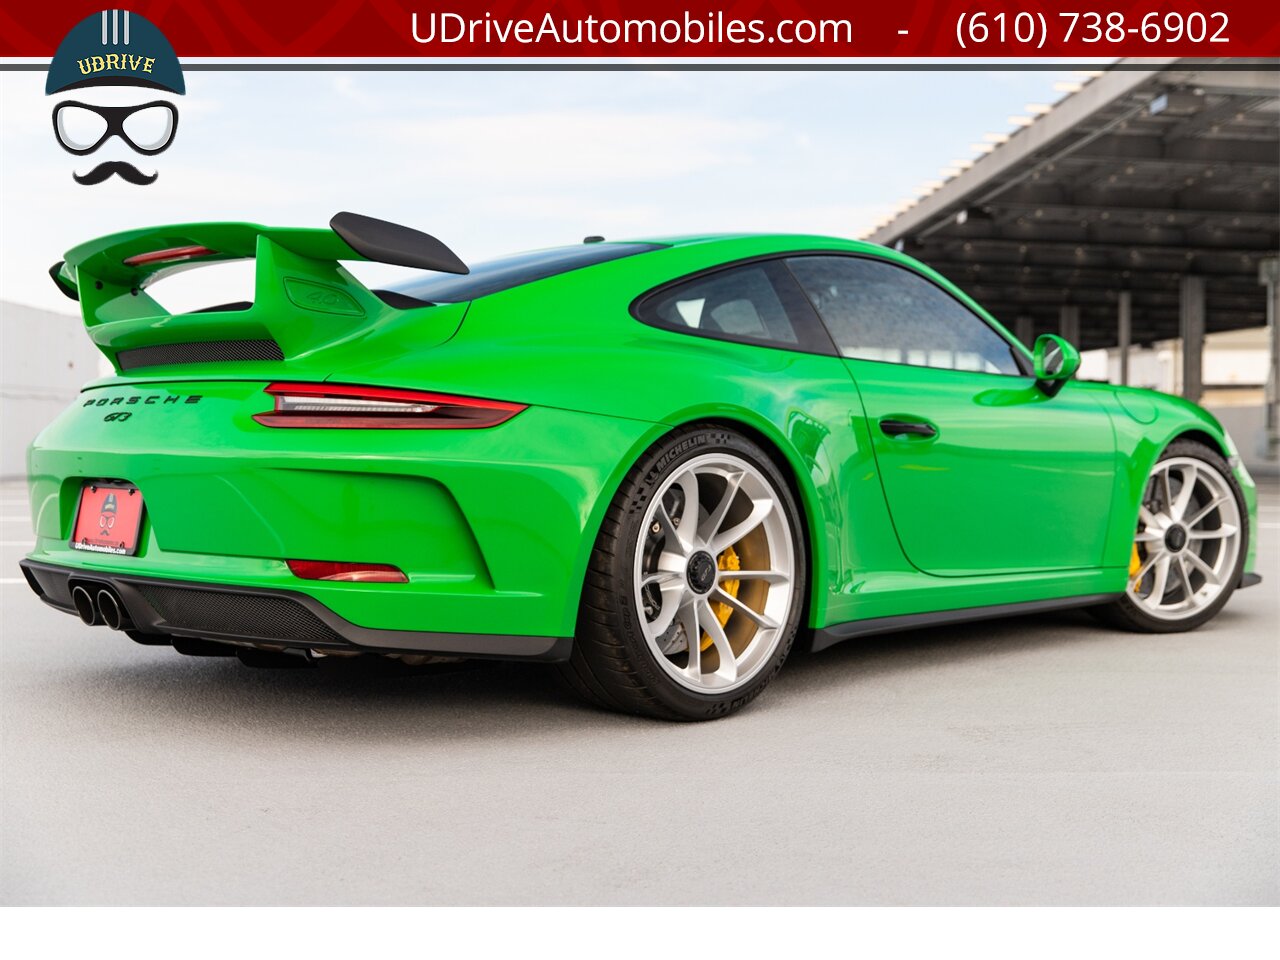 2018 Porsche 911 GT3 6 Speed Paint To Sample Viper Green 48 Miles  Front Axle Lift PCCB Carbon Bucket Seats - Photo 3 - West Chester, PA 19382